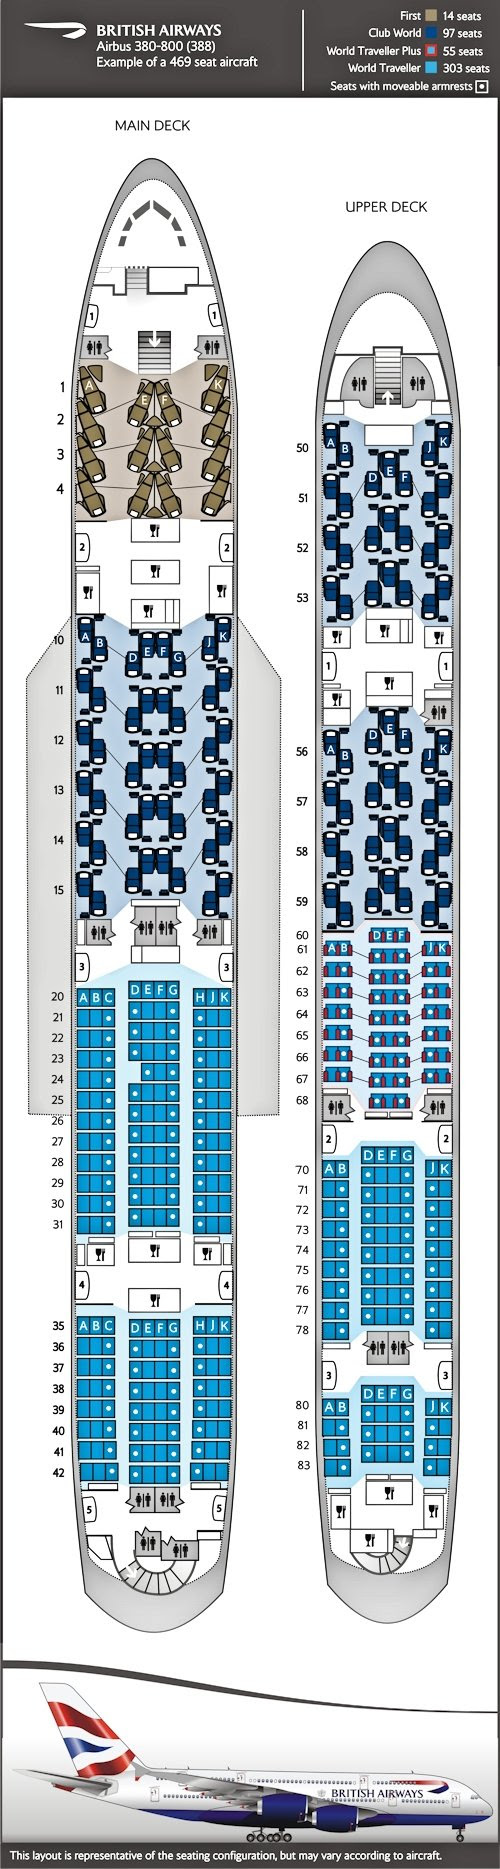 Airbus A380 Singapore Airlines Seating Plan Popular Century